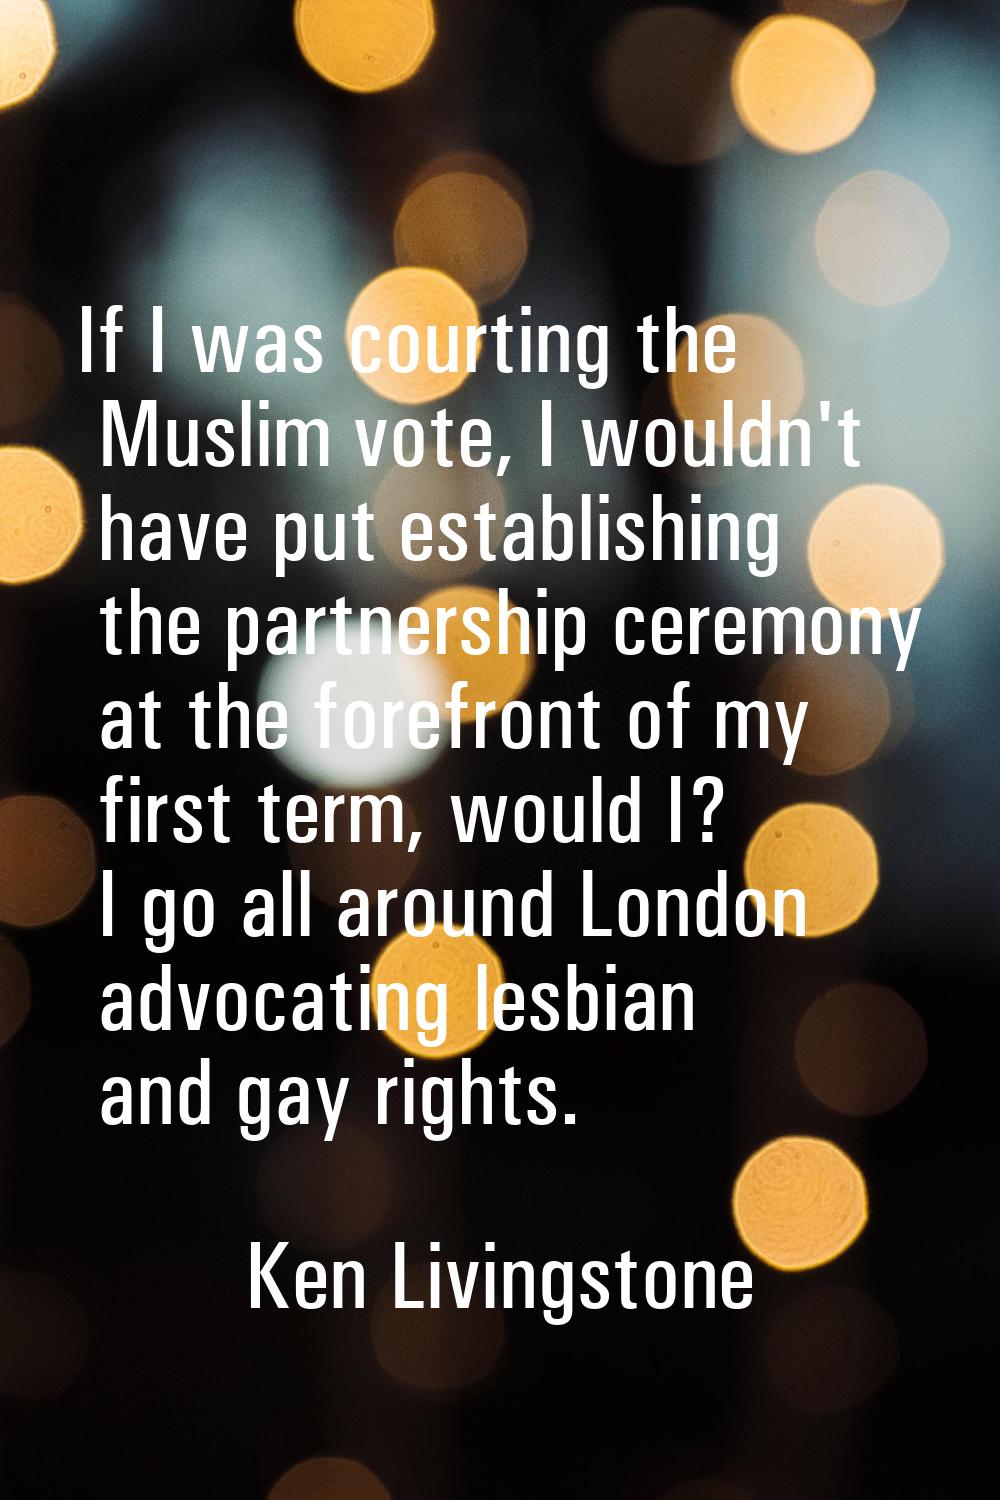 If I was courting the Muslim vote, I wouldn't have put establishing the partnership ceremony at the